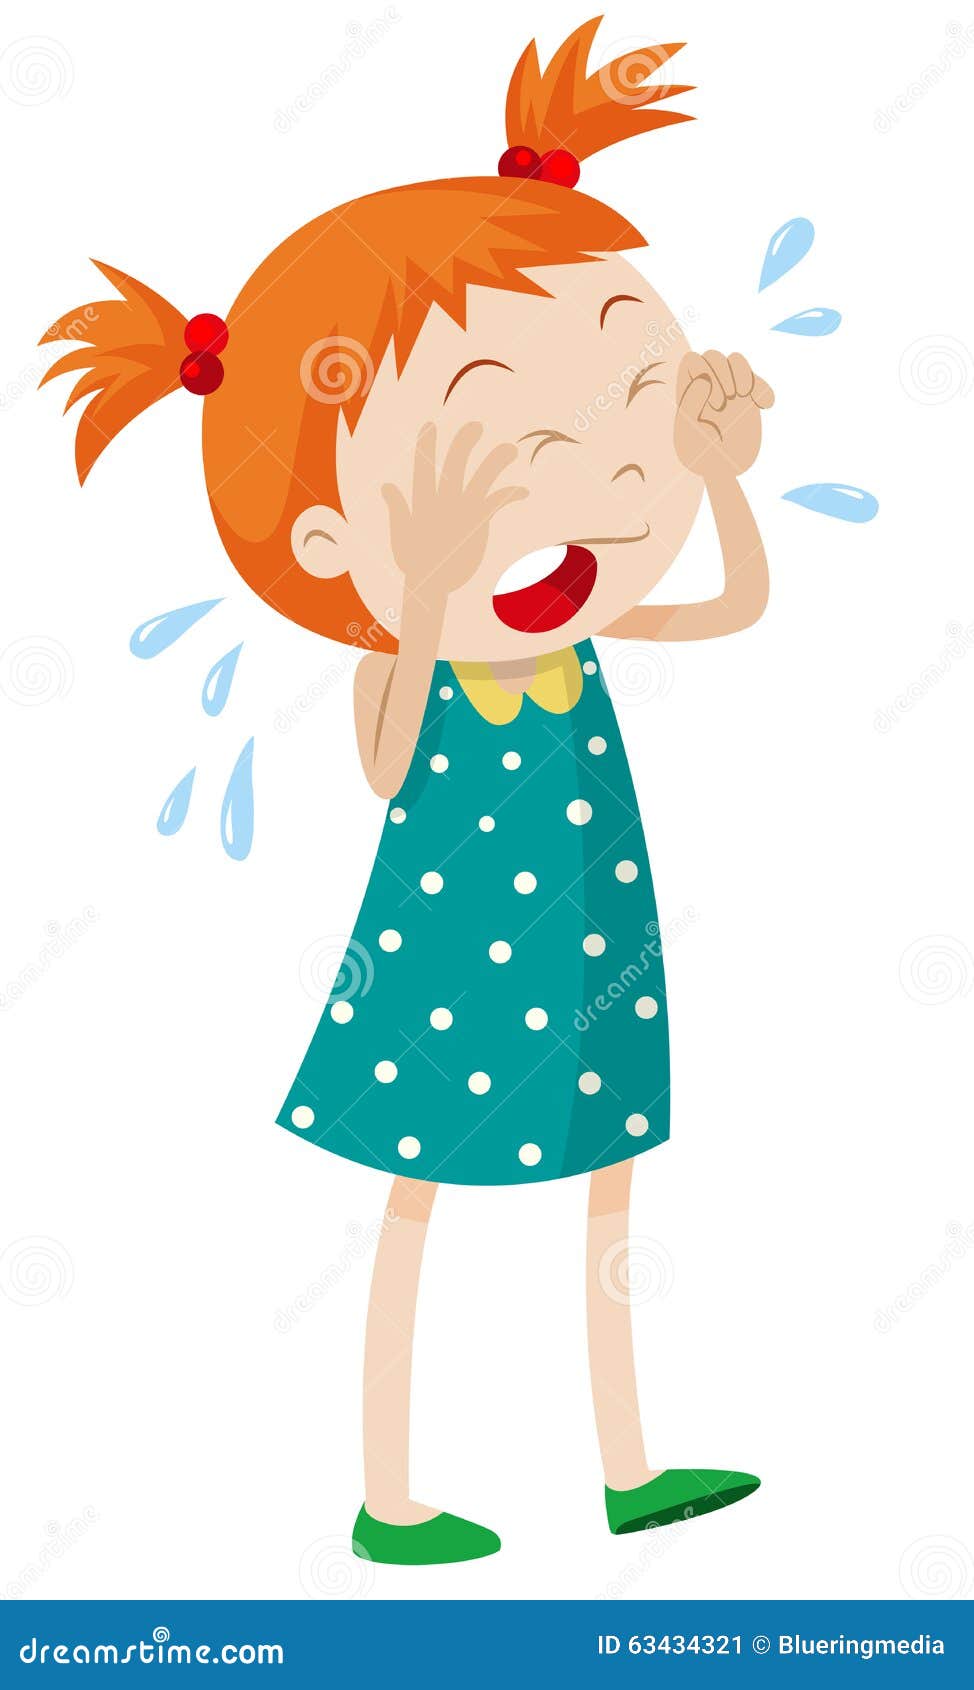 clipart of a girl crying - photo #30